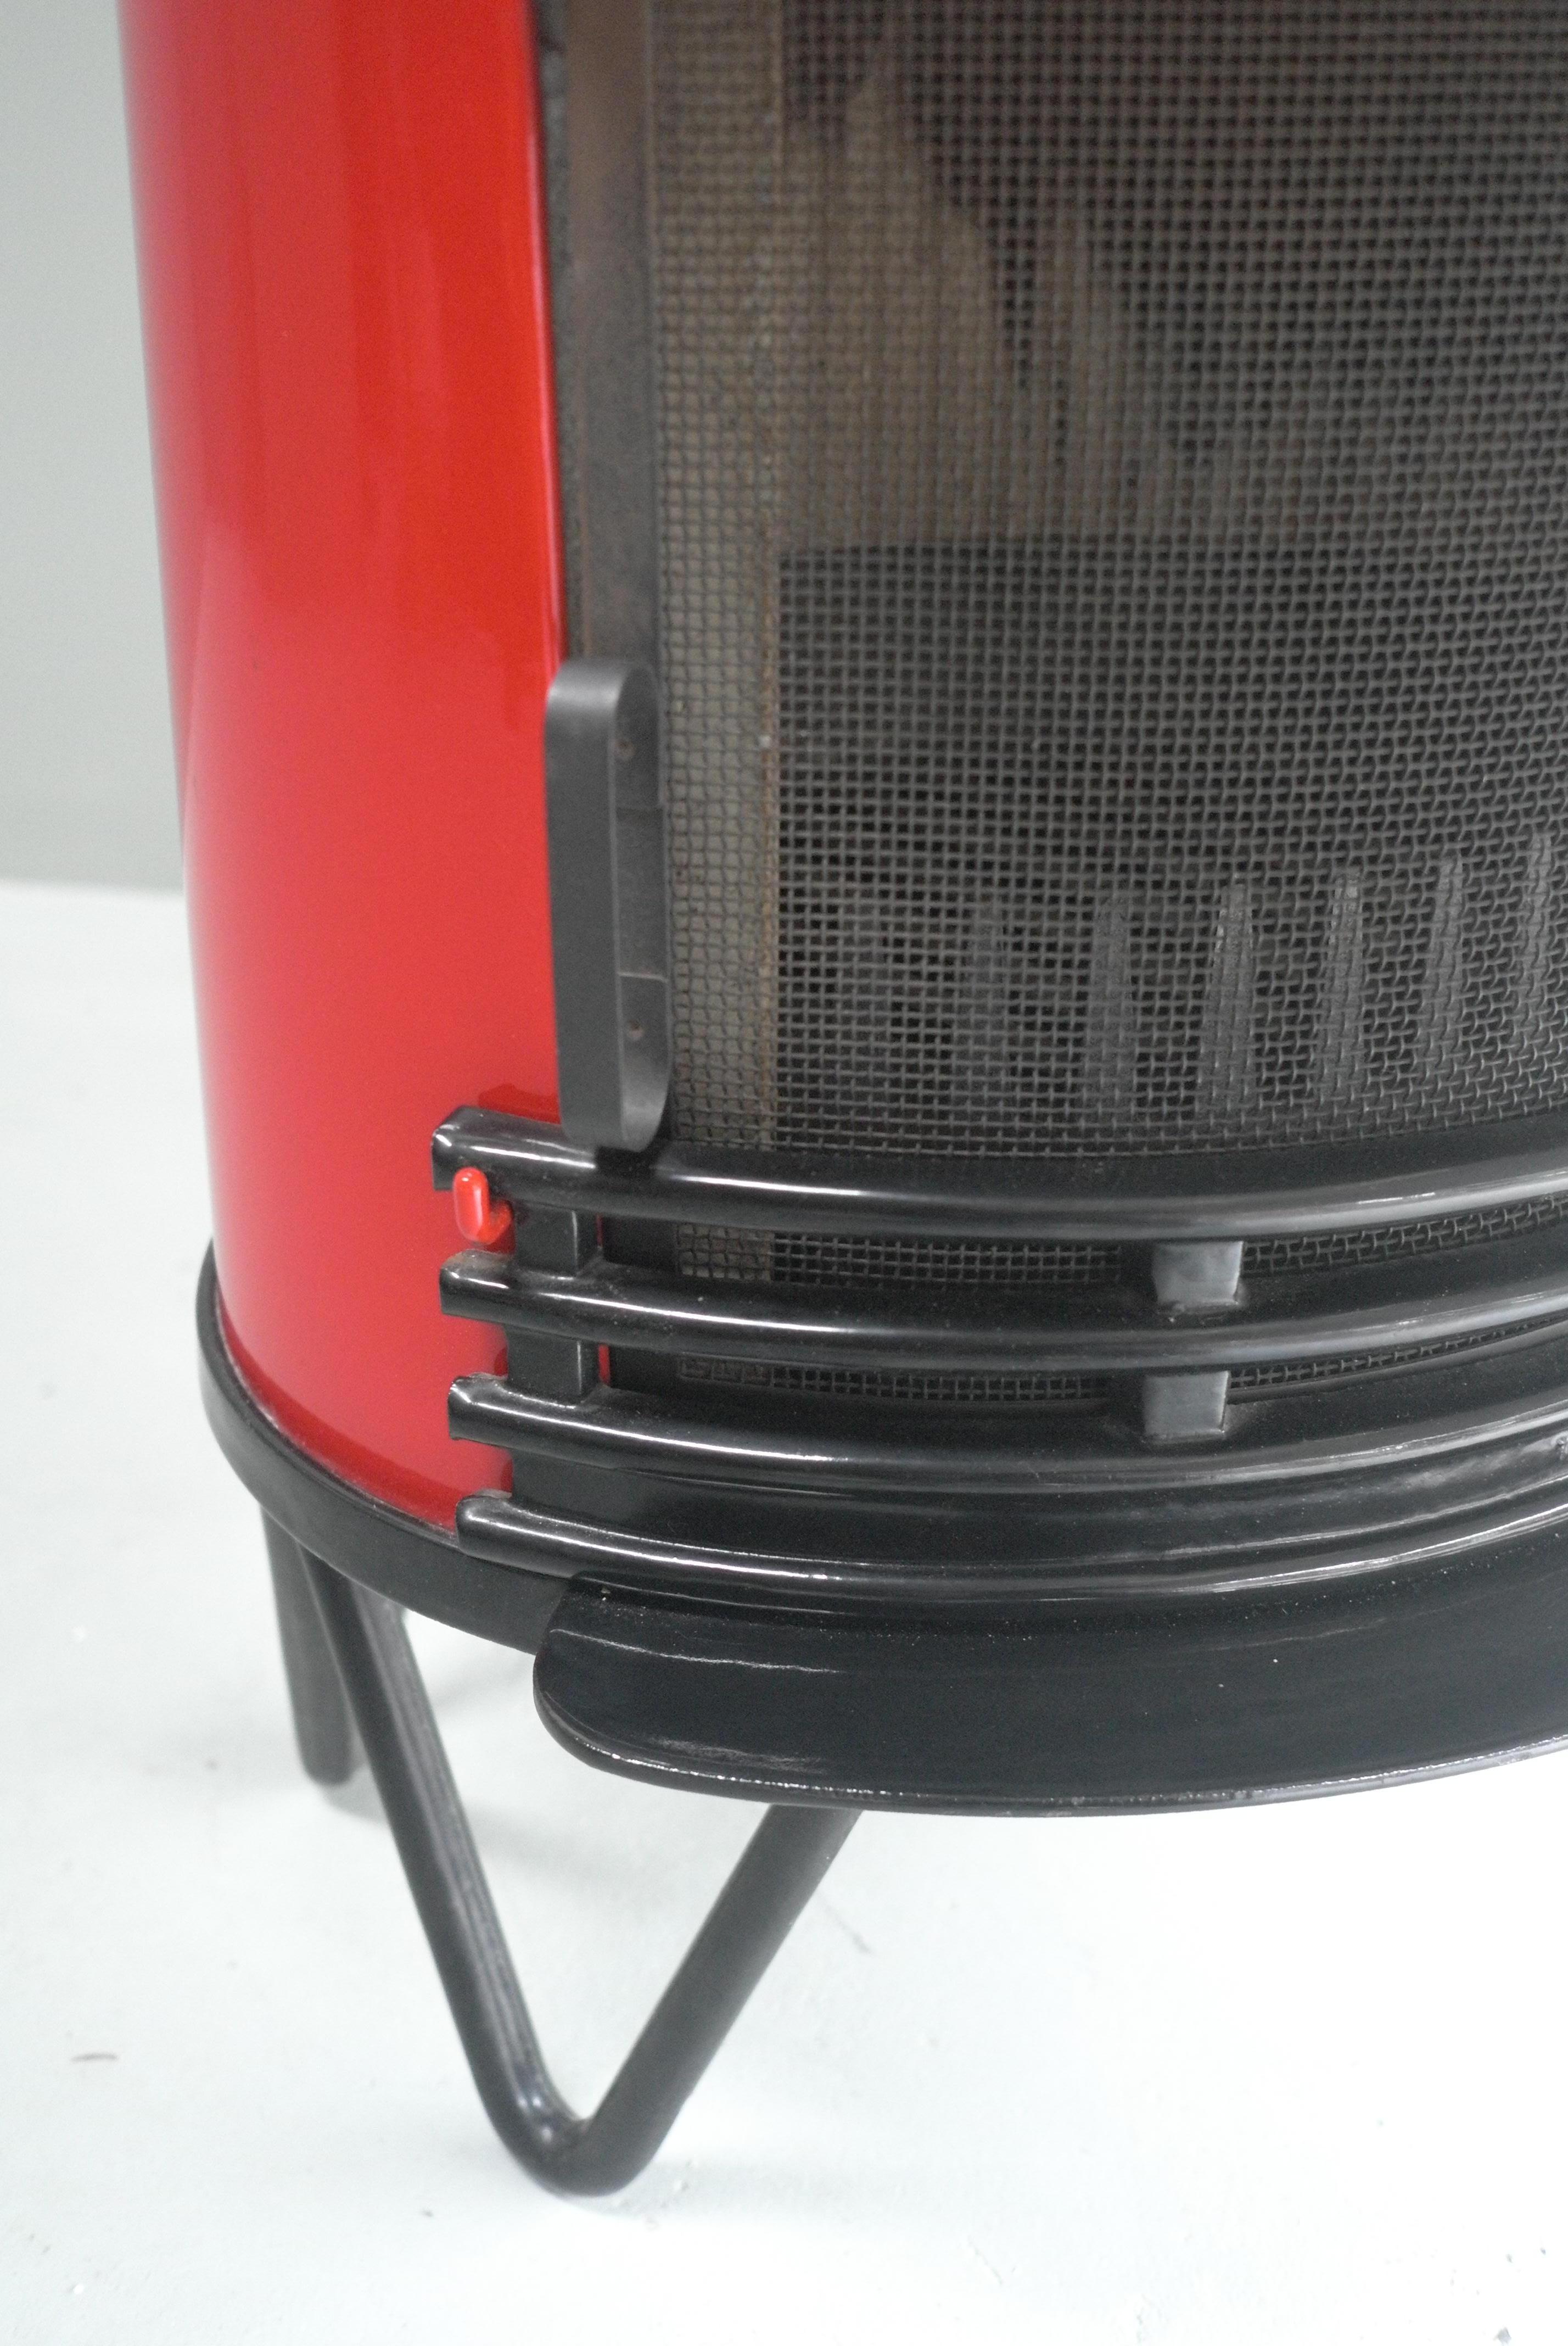 Danish Red Enameled Fireplace by Architectural Firm Hoff & Windinge for Tasso For Sale 4